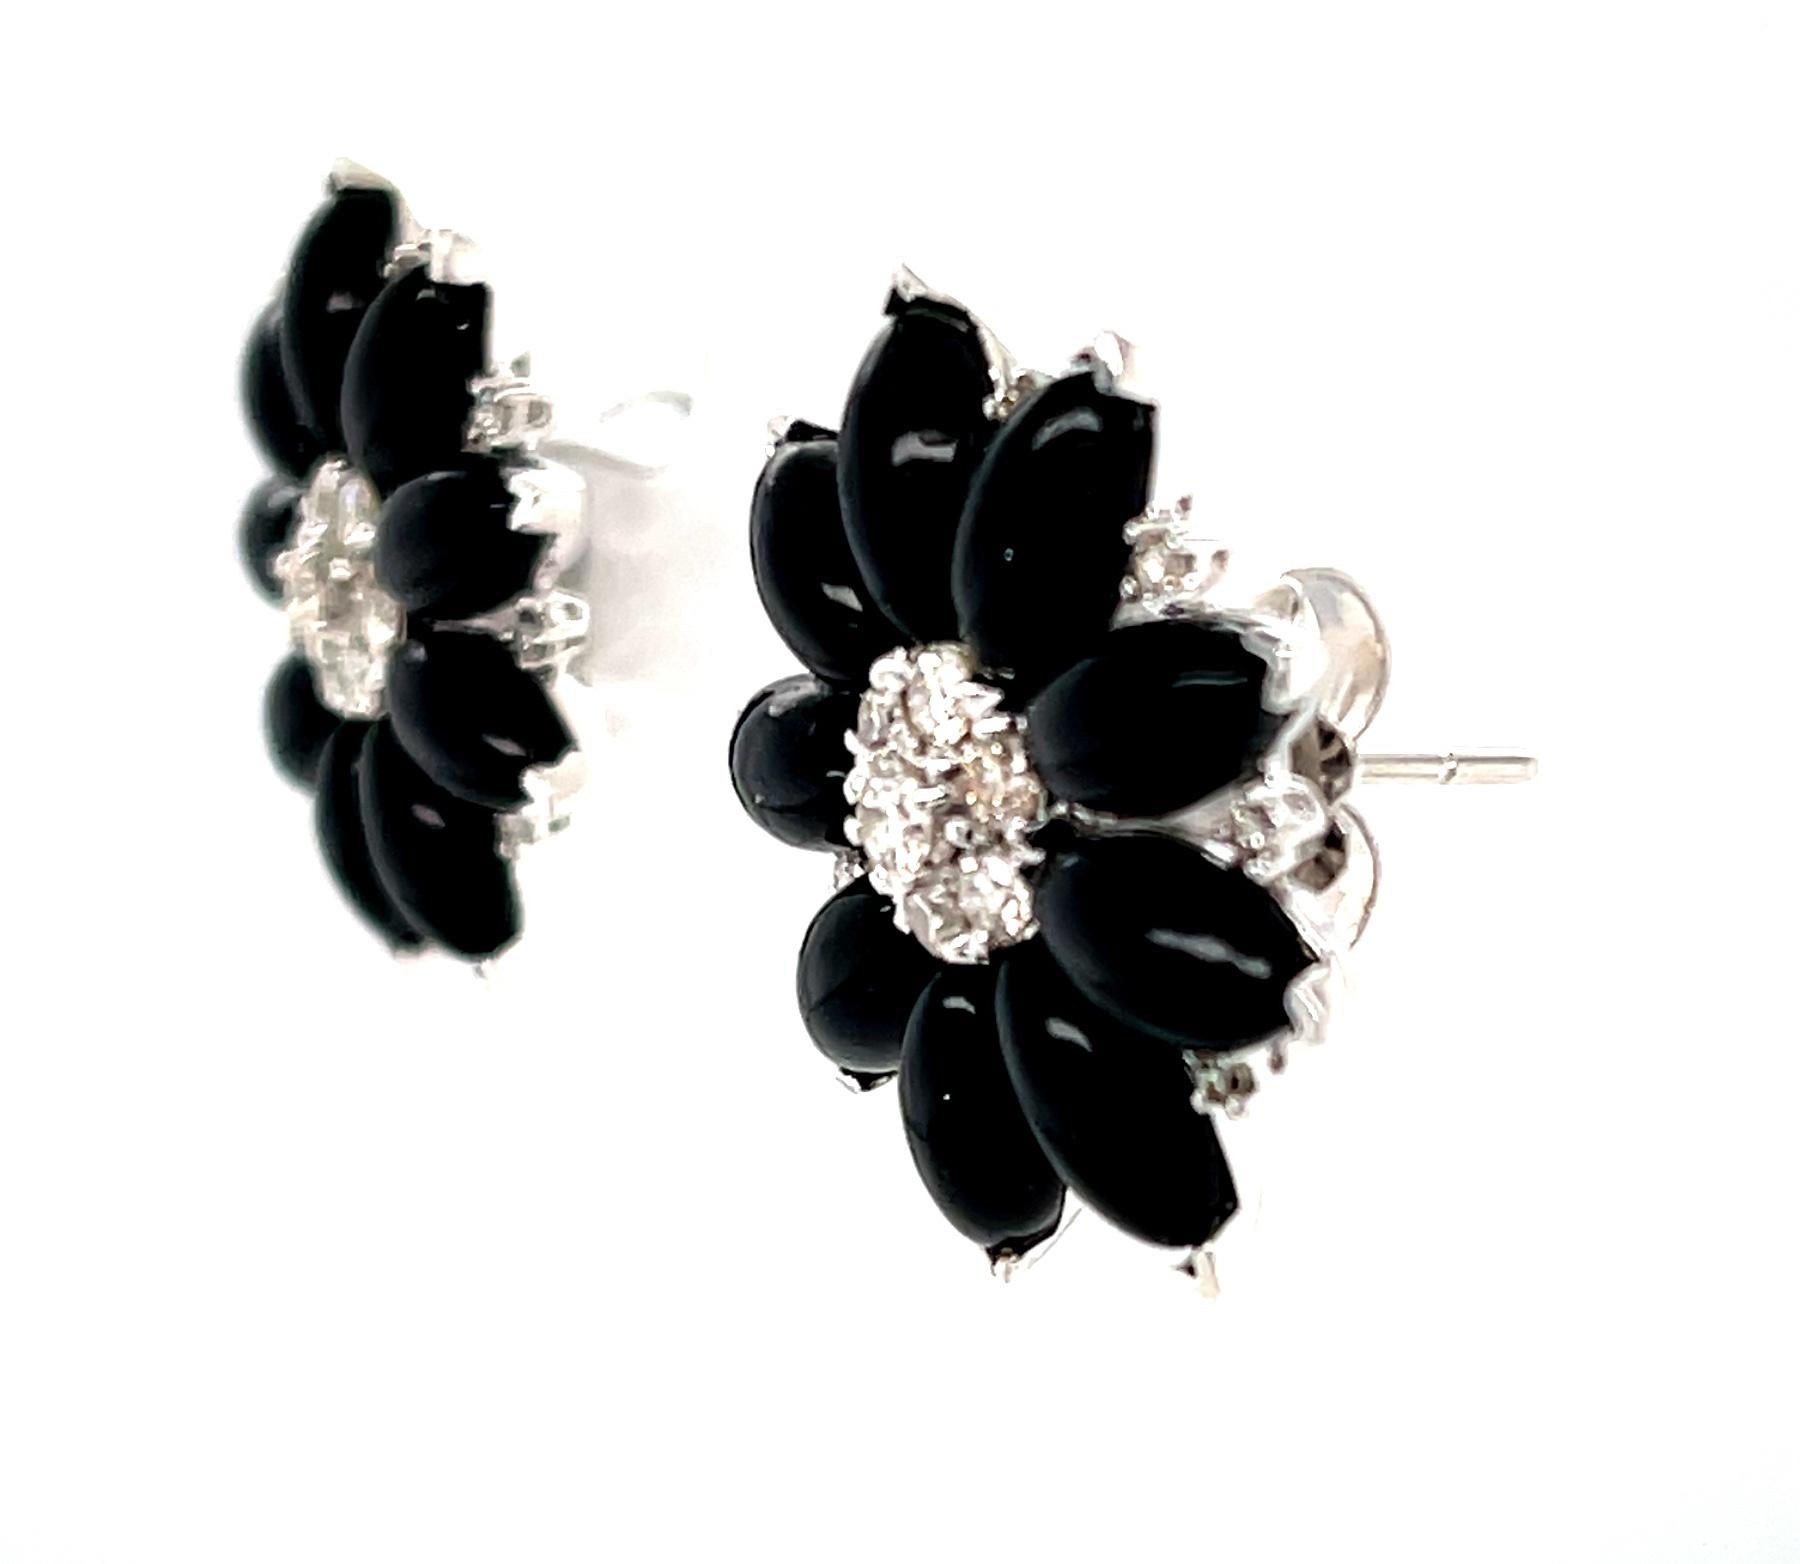 Round Cut Diamond and Onyx Flower Earrings in 18K White Gold, .91 Carat Total